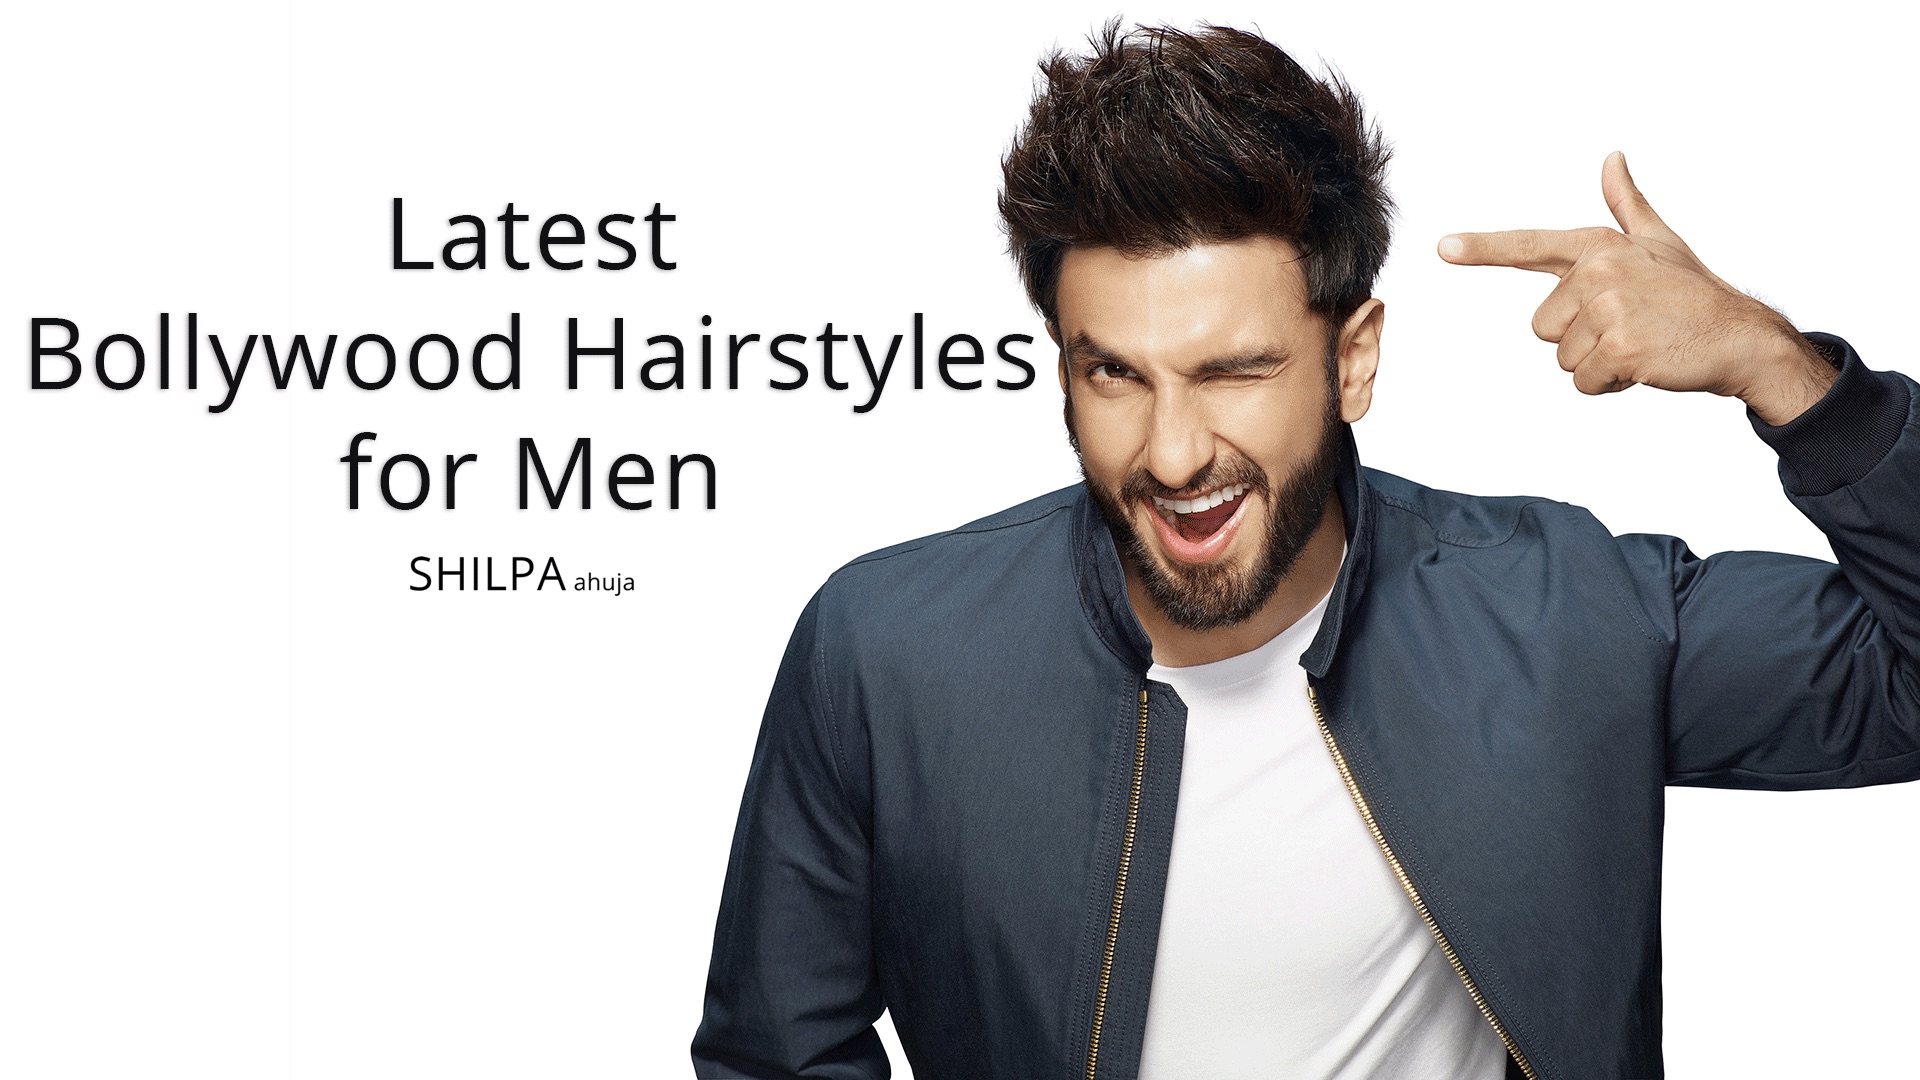 Bollywood-hairstyles-for-men-latest-haircuts